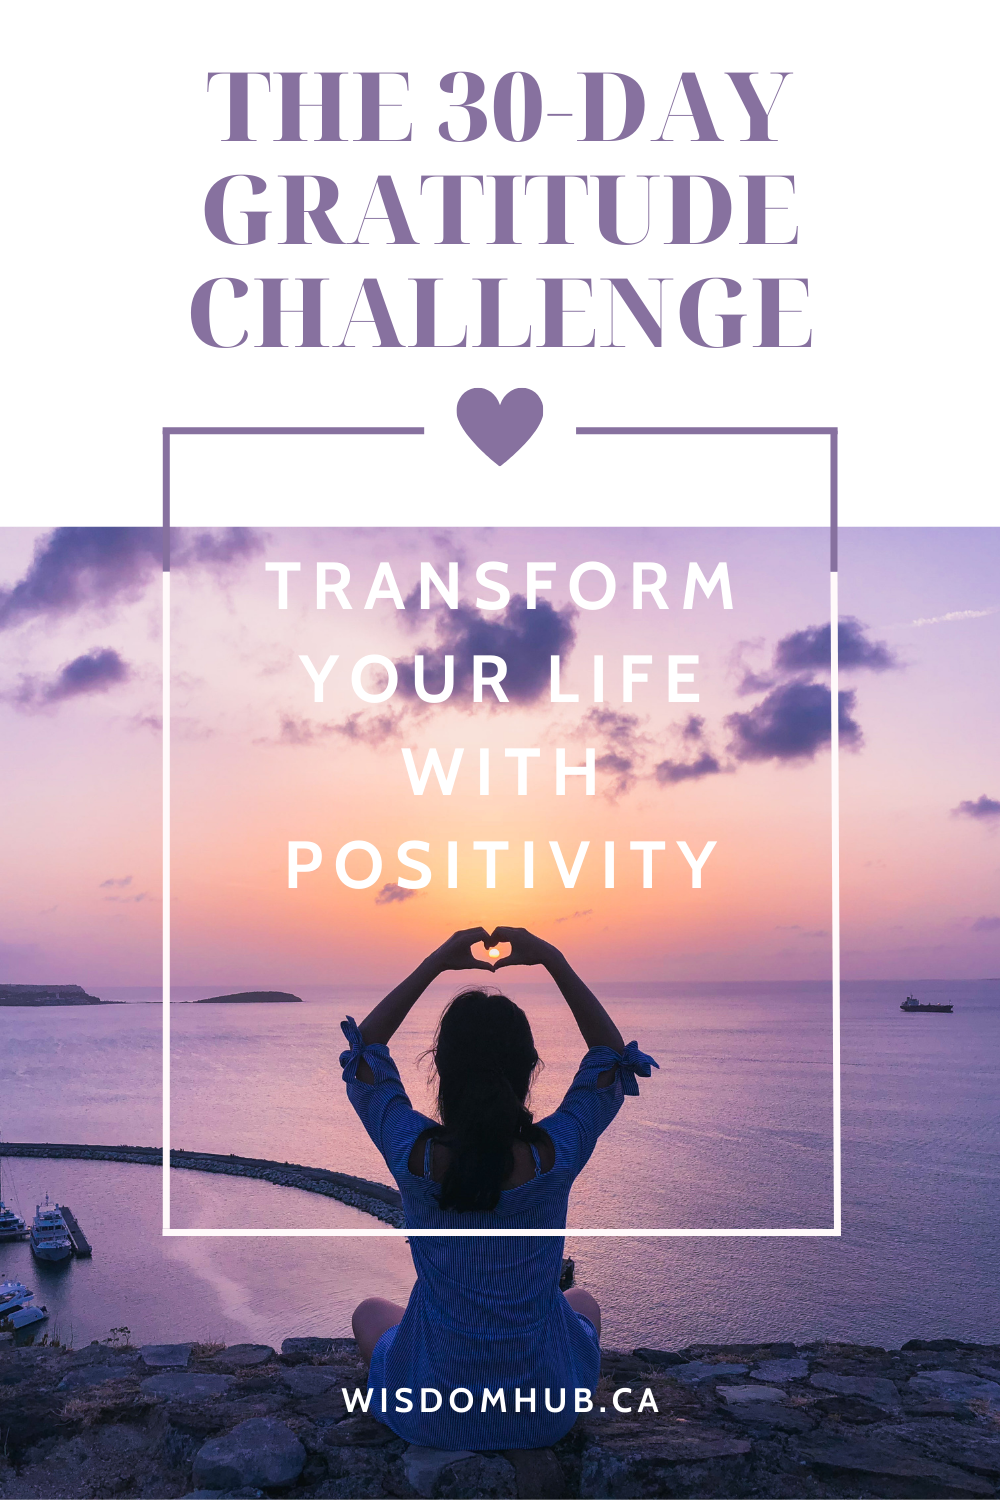 The 30-Day Gratitude Challenge: Transform Your Life With Positivity